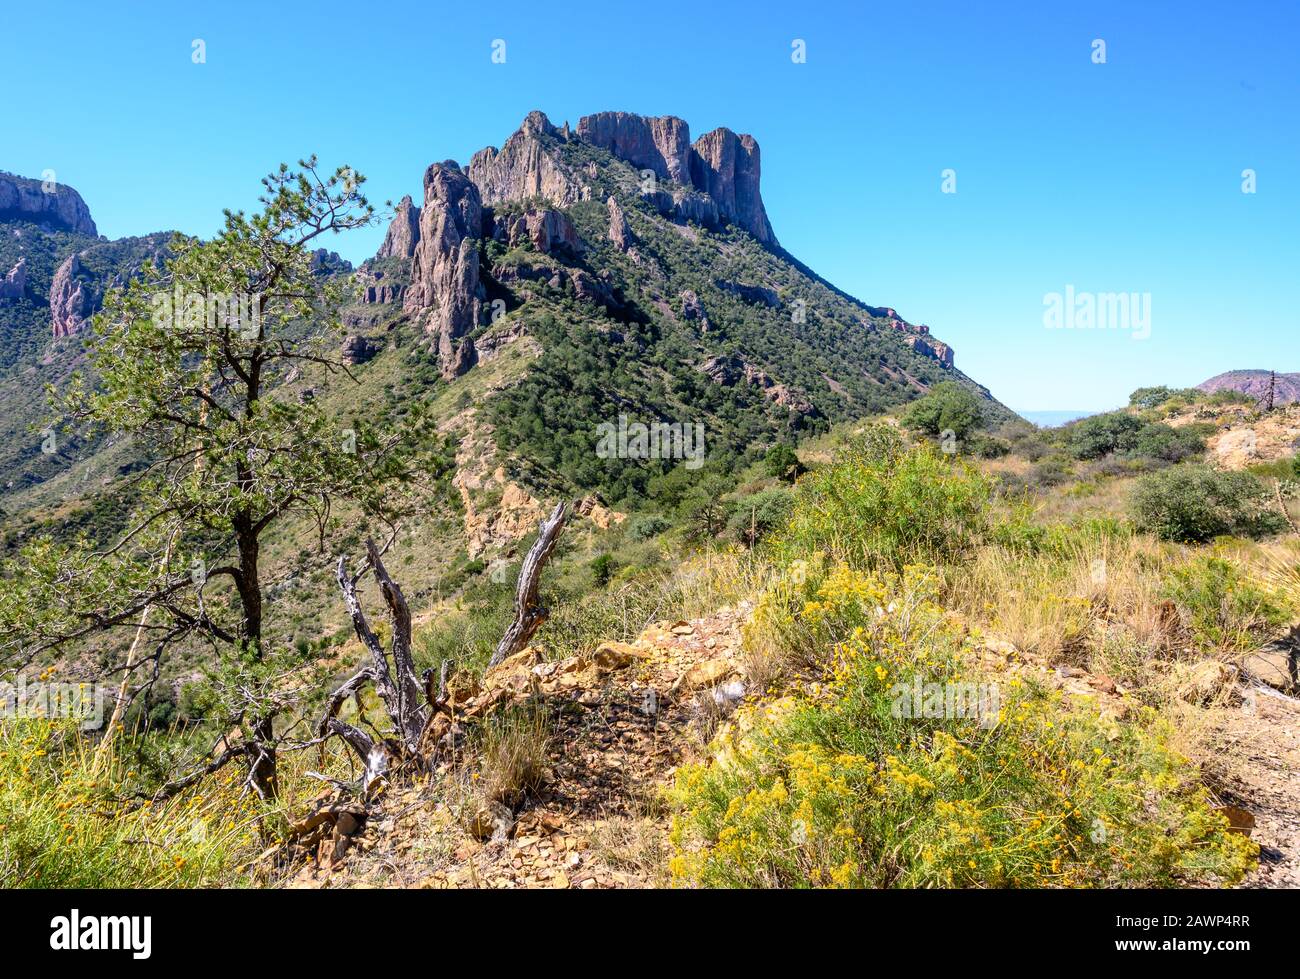 Mountain view from Lost Mine Trail in Big Bend National Park in West Texas. Trees and desert shrubbery in the foreground Stock Photo